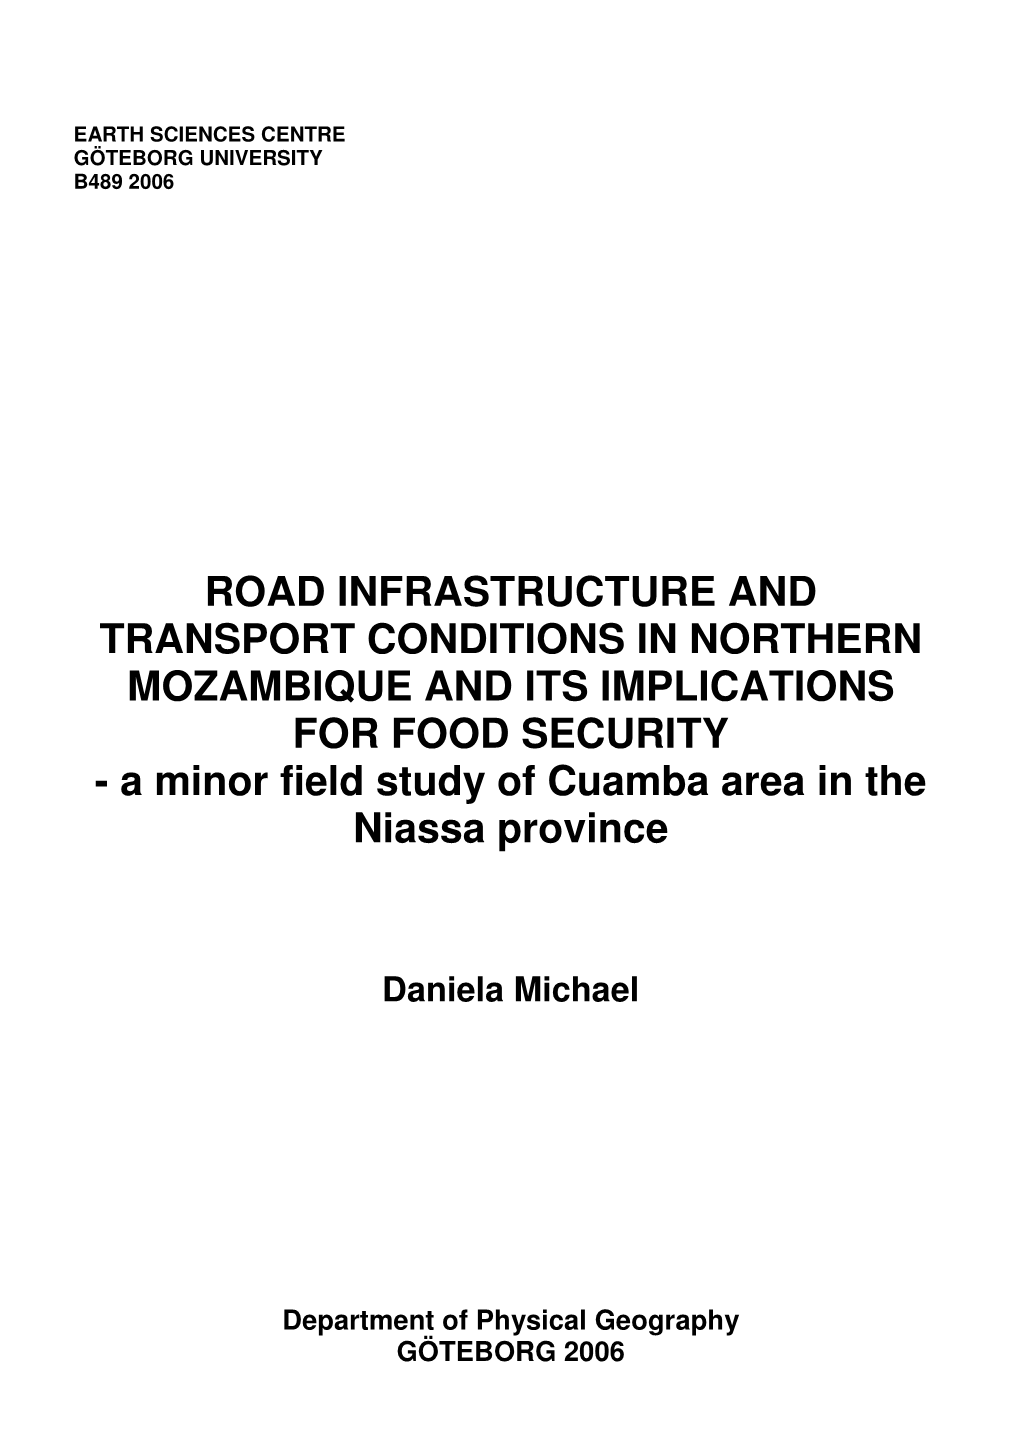 Road Infrastructure and Transport Conditions In